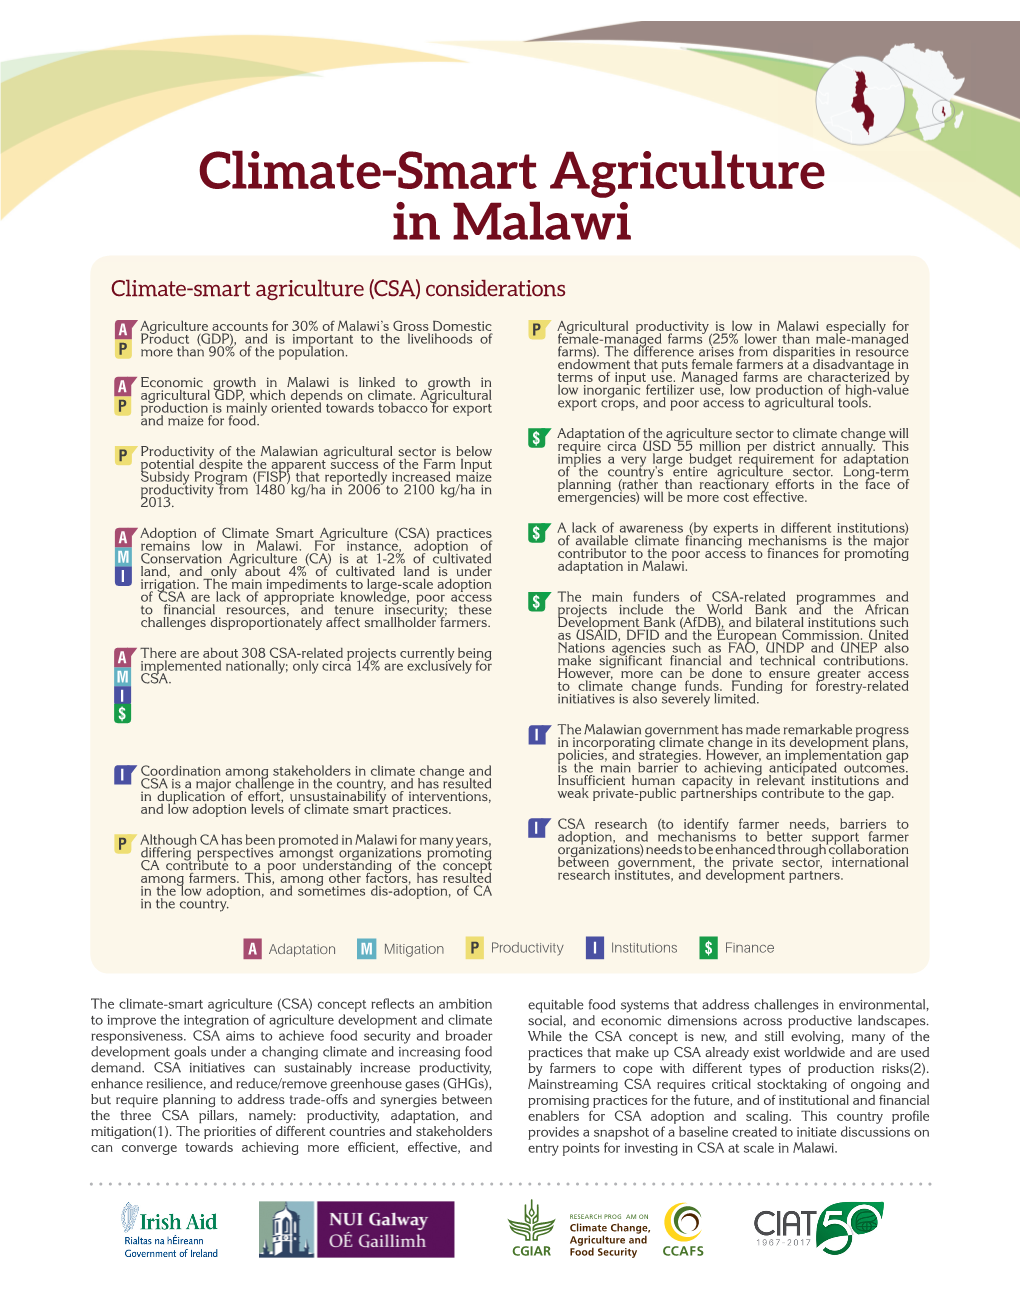 Climate-Smart Agriculture in Malawi